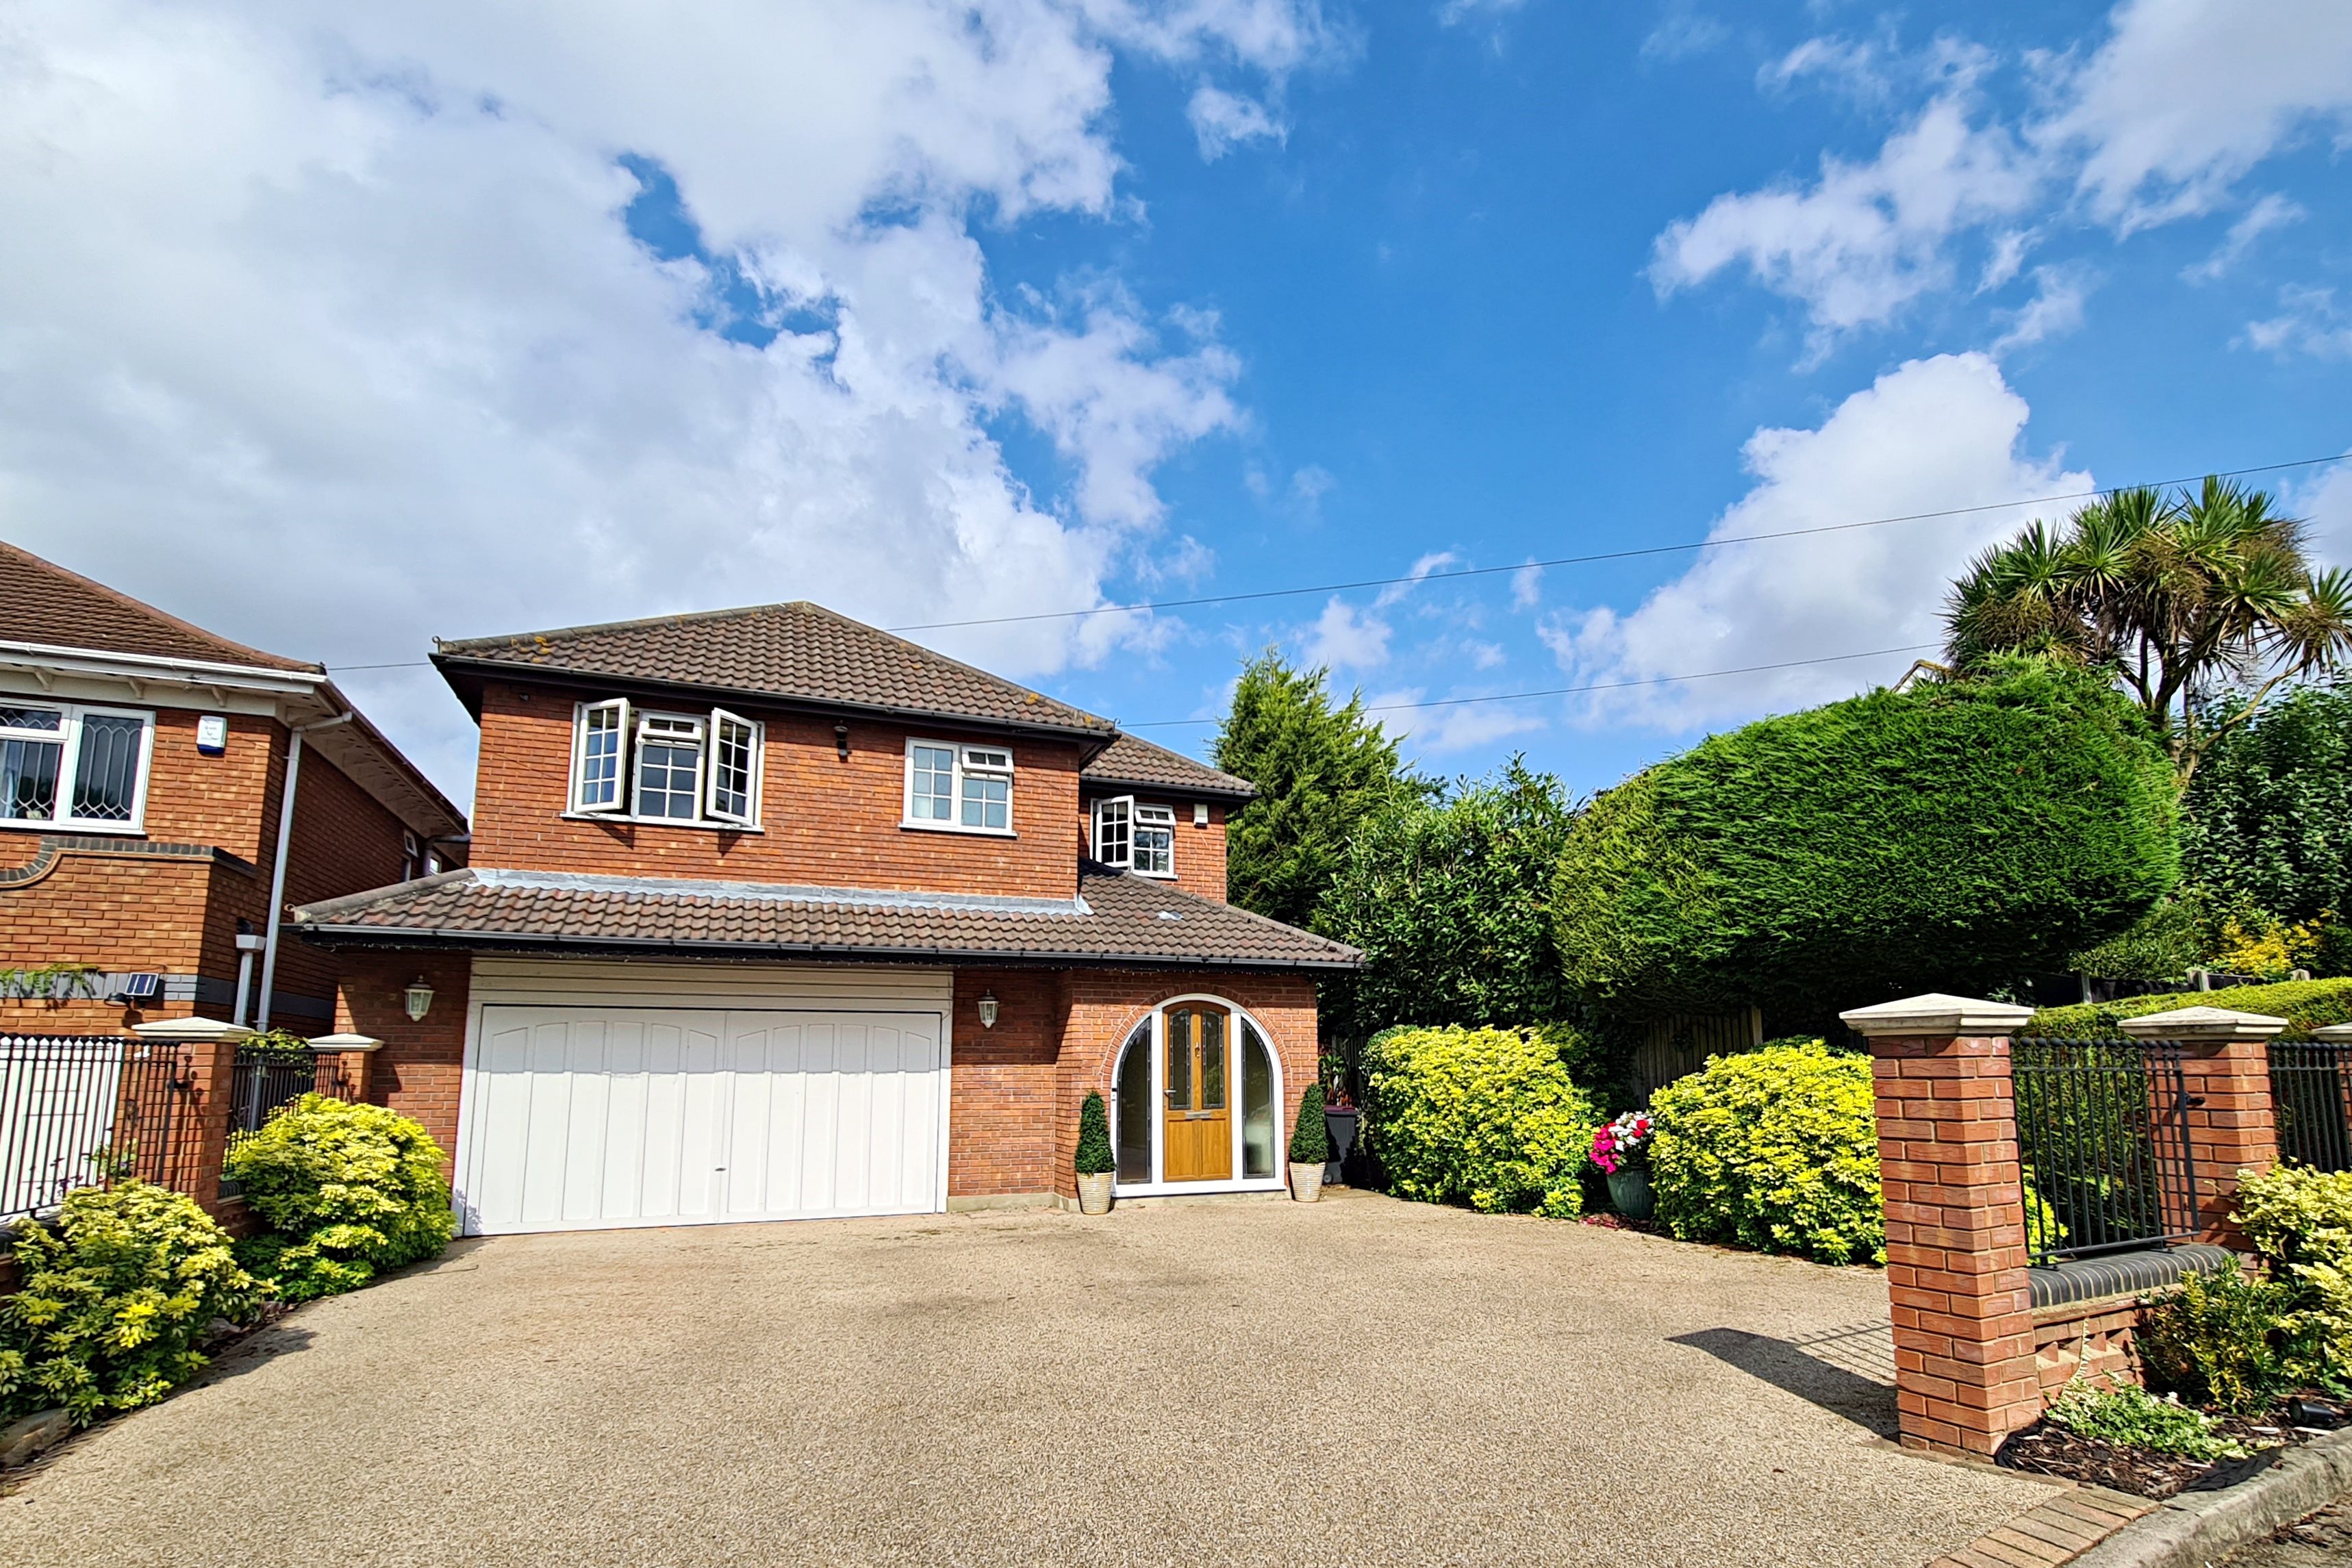 5 bed detached house to rent in Eastern Road, Rayleigh - Property Image 1